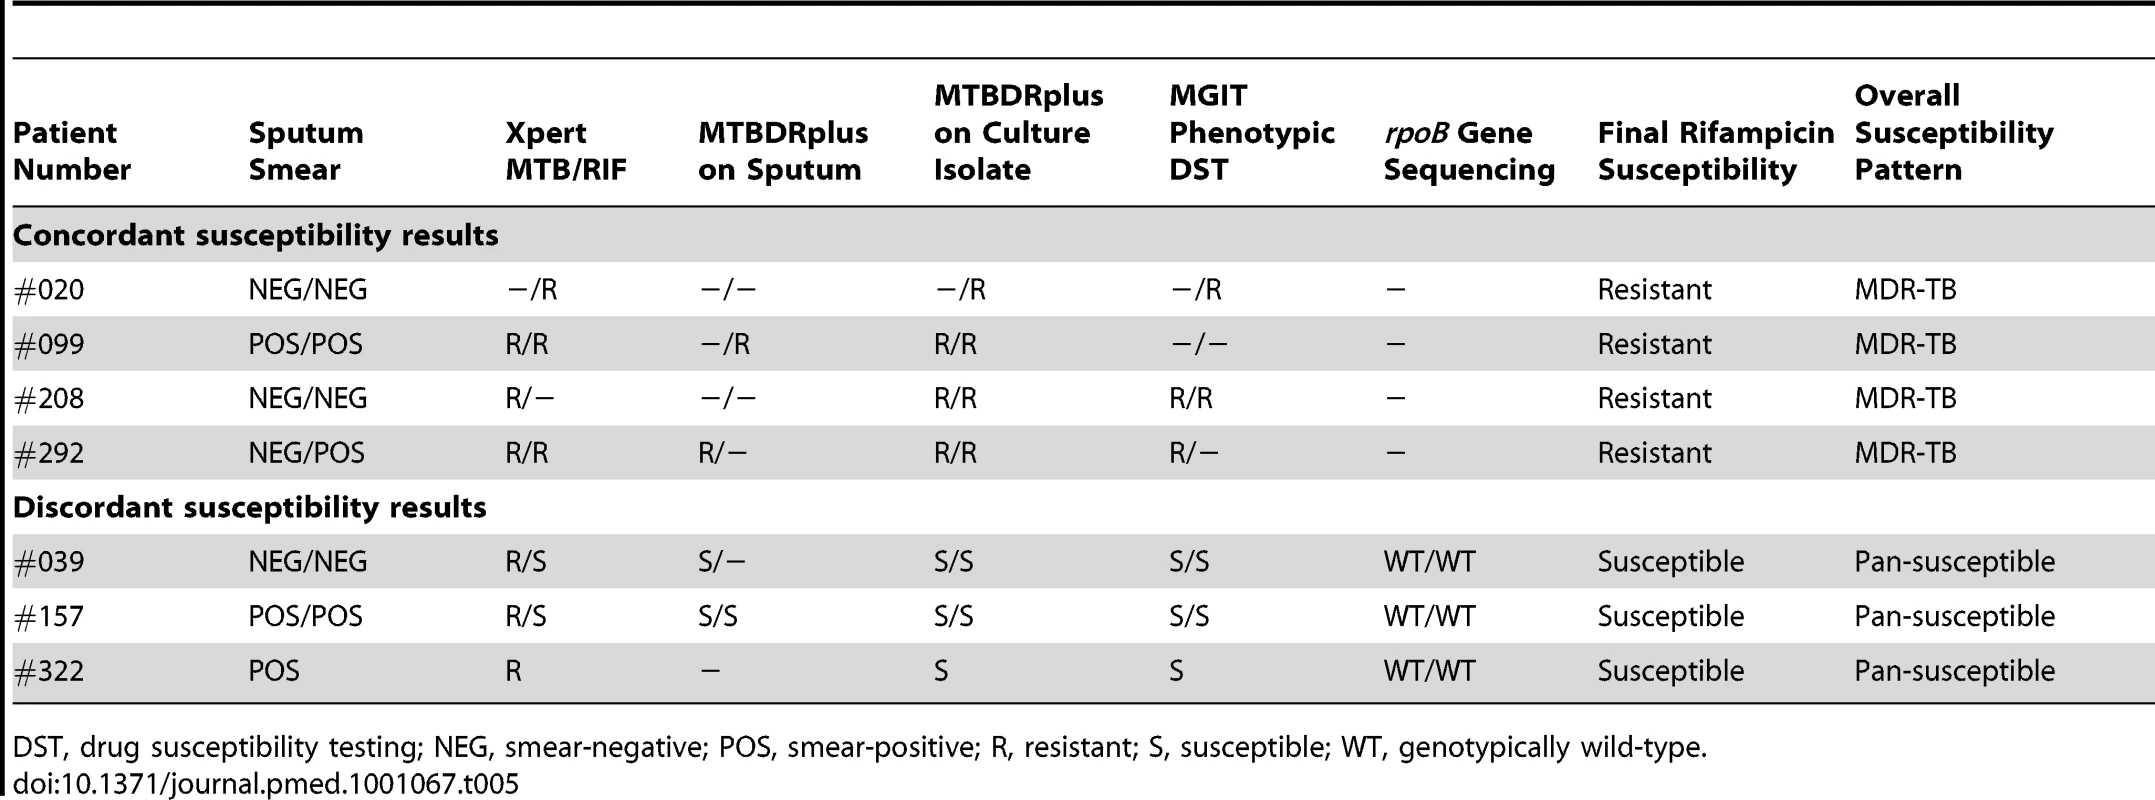 Comparison of results regarding drug susceptibility testing for rifampicin among paired samples from patients (<i>n</i> = 6) in whom rifampicin resistance was detected using one or more assays.